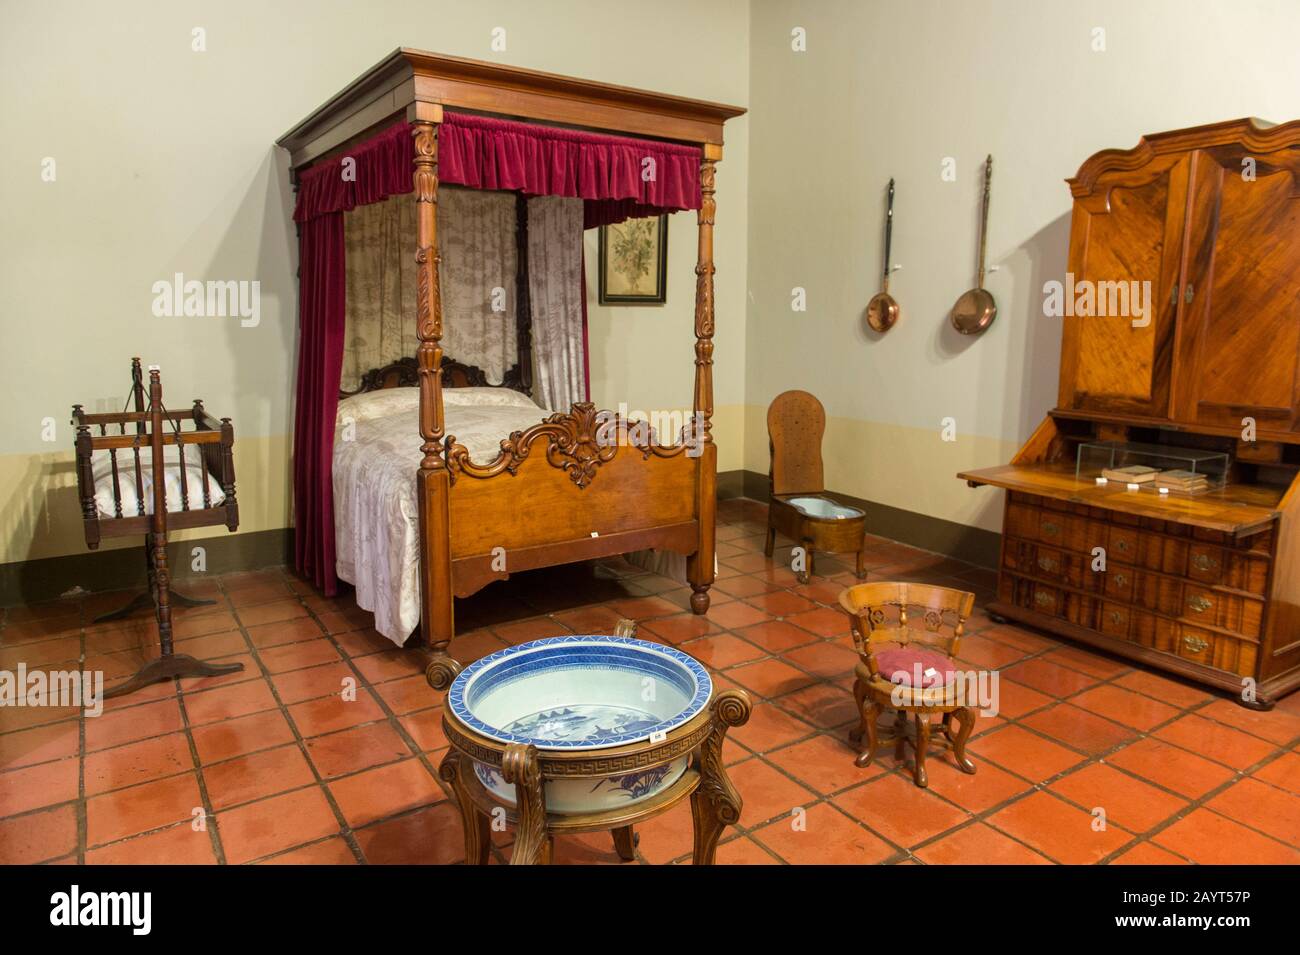 Interior of the homestead museum at Groot Constantia, a historic wine estate near Cape Town, South Africa. Stock Photo